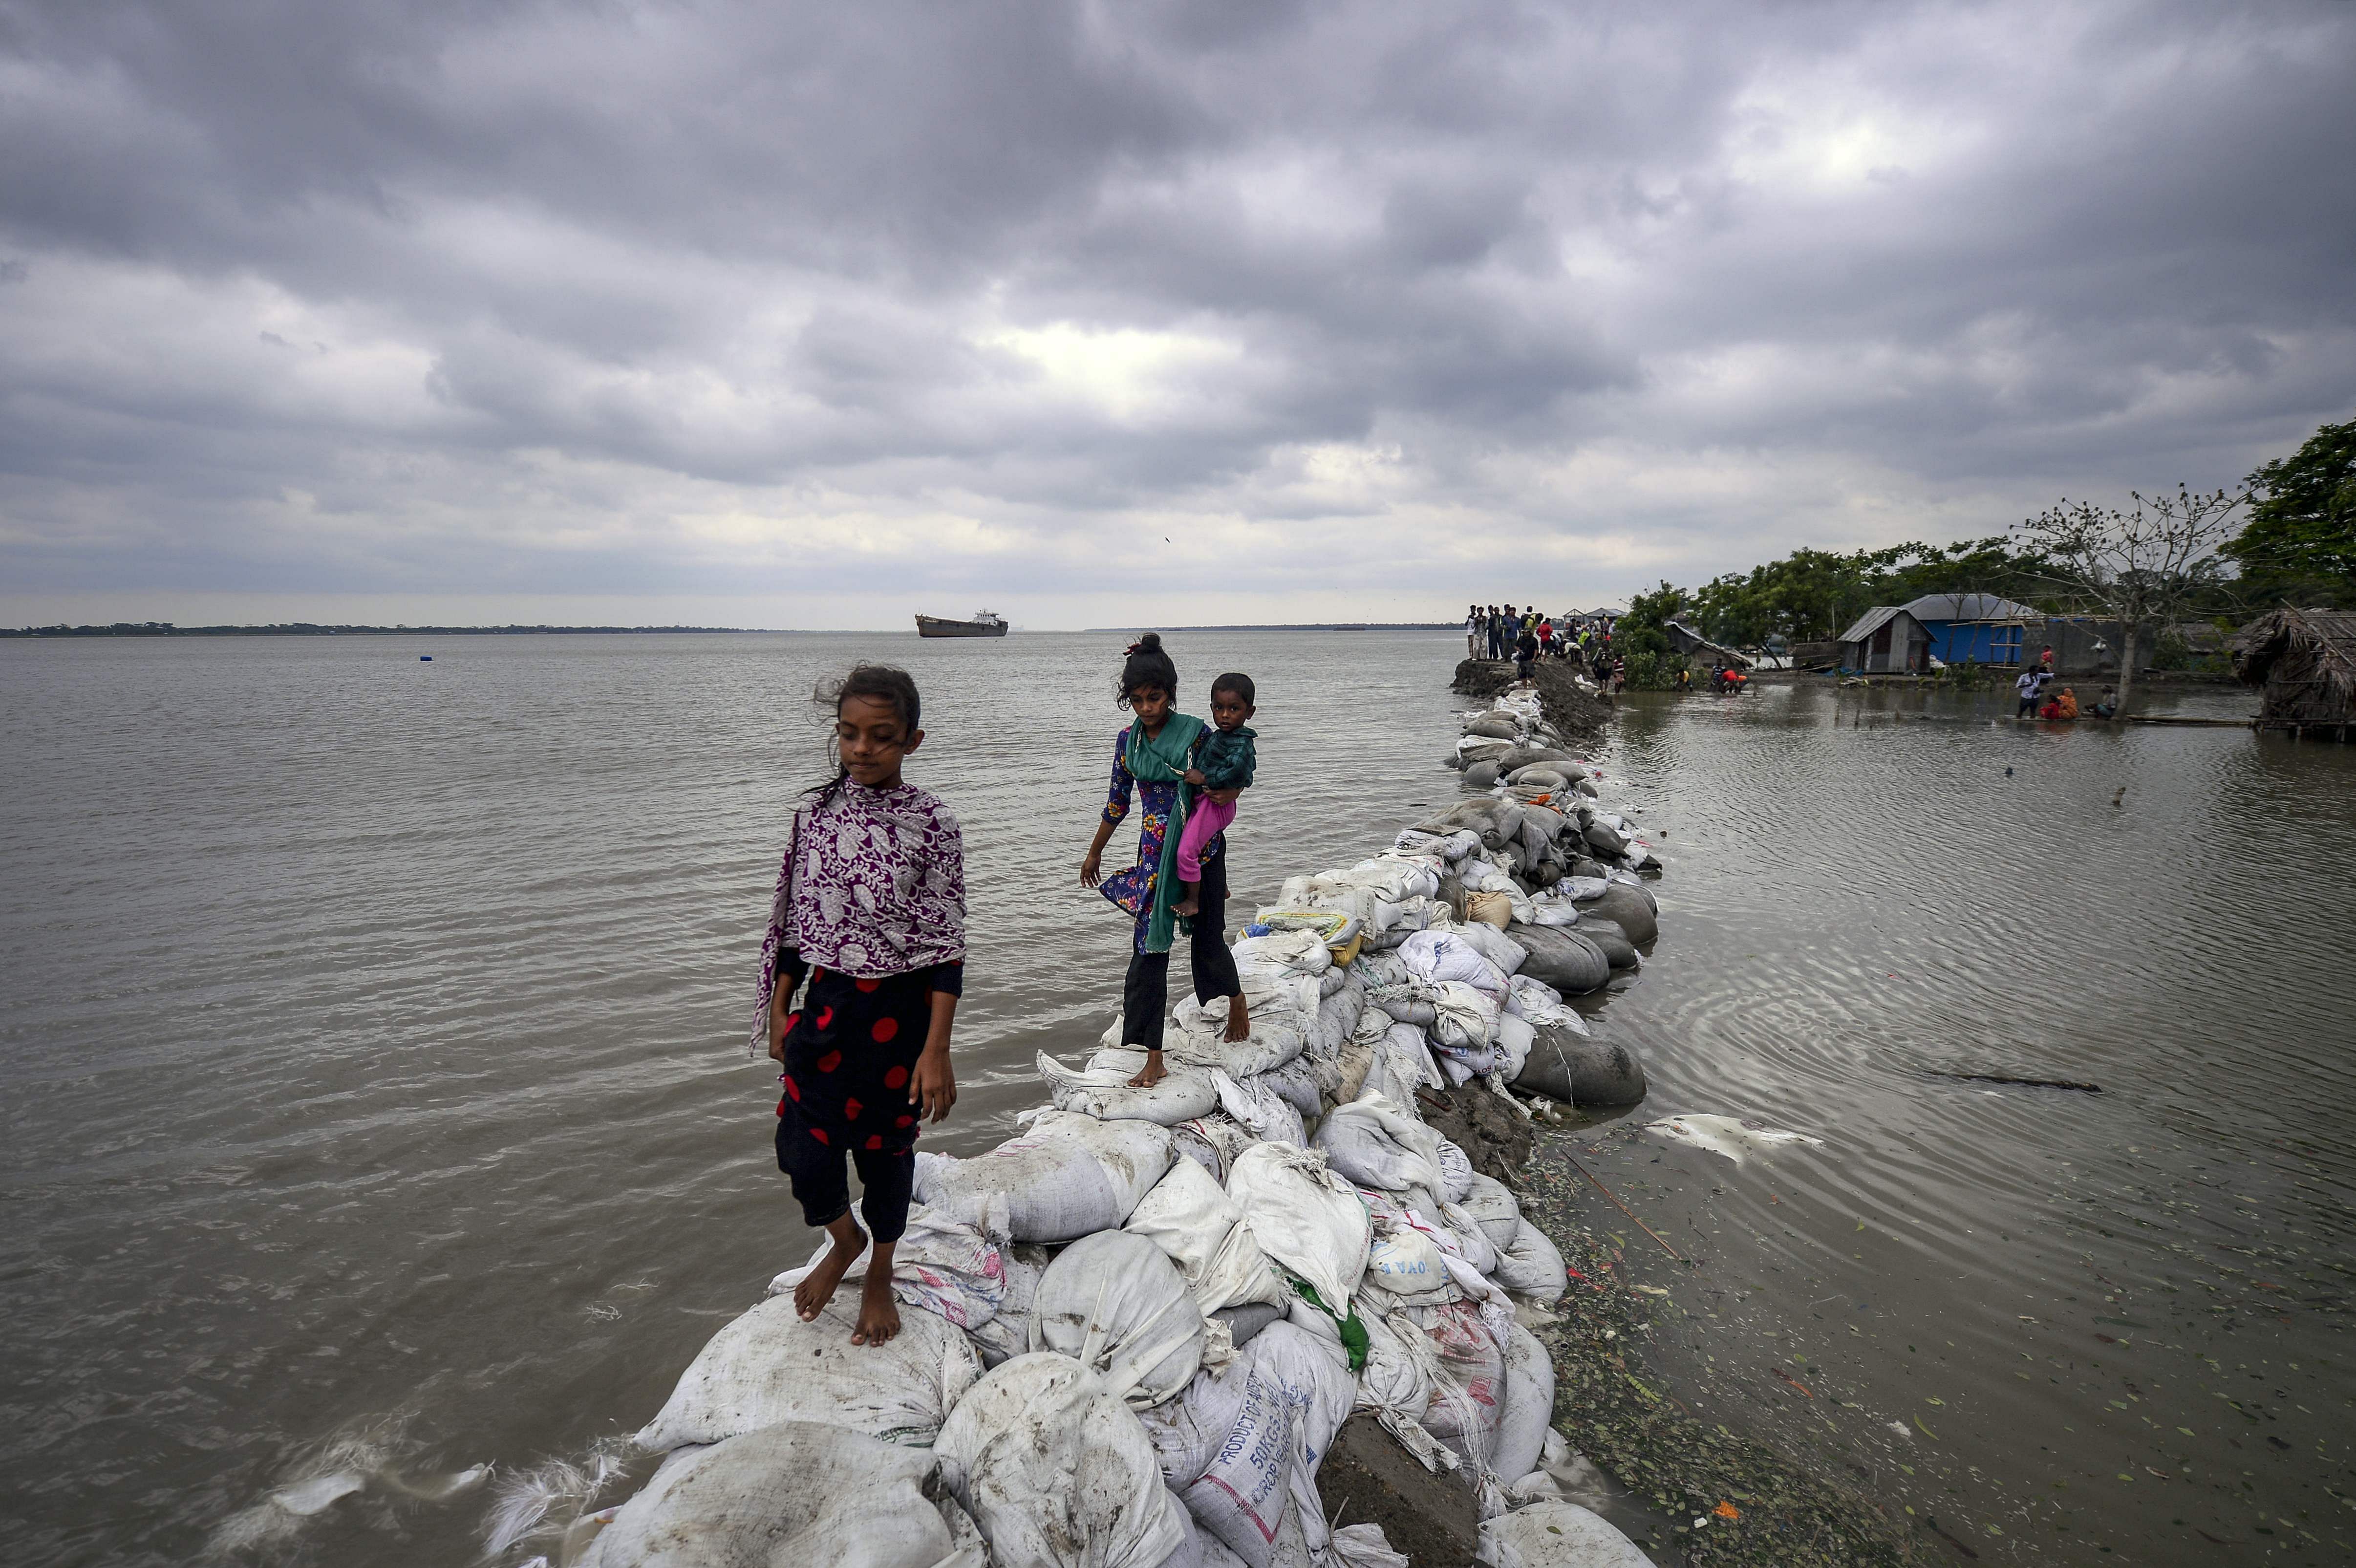   Bangladeshi children walk over the top of a sandbag embankment that was breached by high waters in Khulna on May 4, 2019, as Cyclone Fani reached Bangladesh. - Cyclone Fani, one of the biggest to hit India in years, barrelled into Bangladesh on May 4 after leaving a trail of deadly destruction in India. Representative image/Credit: AFP Photo